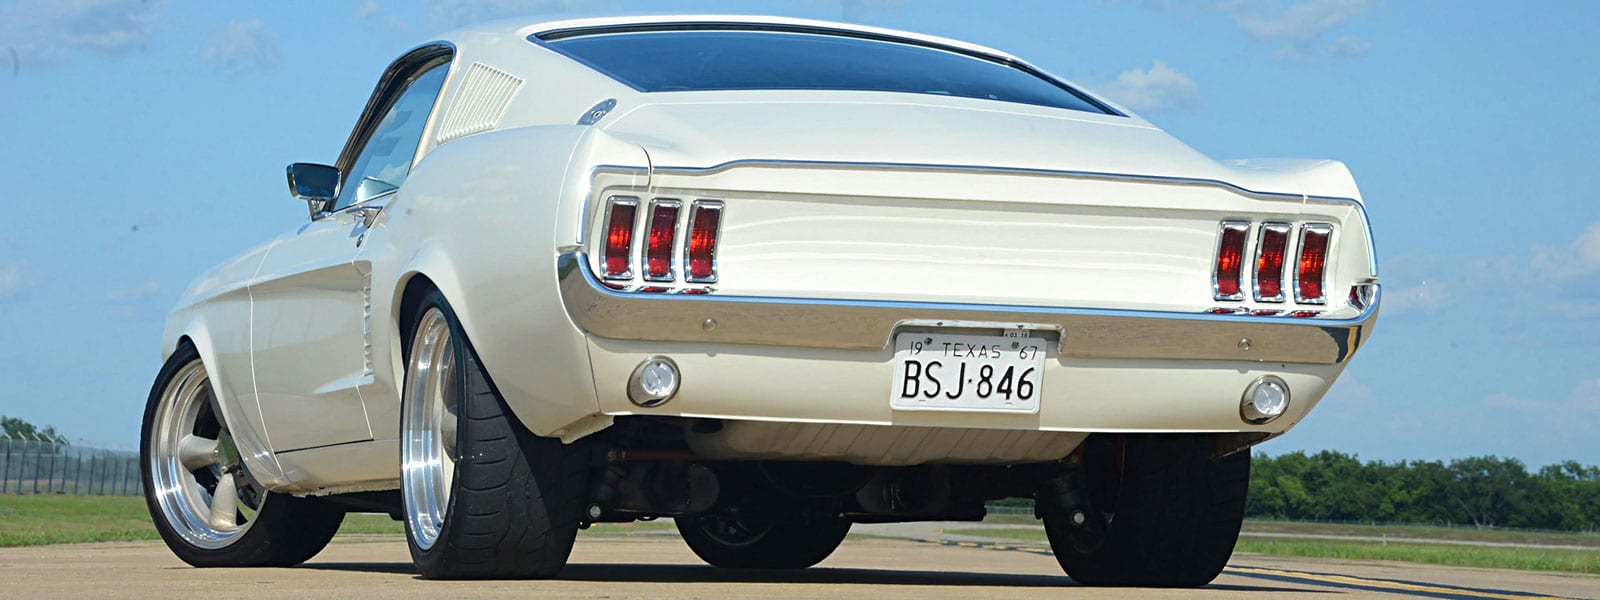 1967 Ford Mustang Fastback - Jerry Coleman